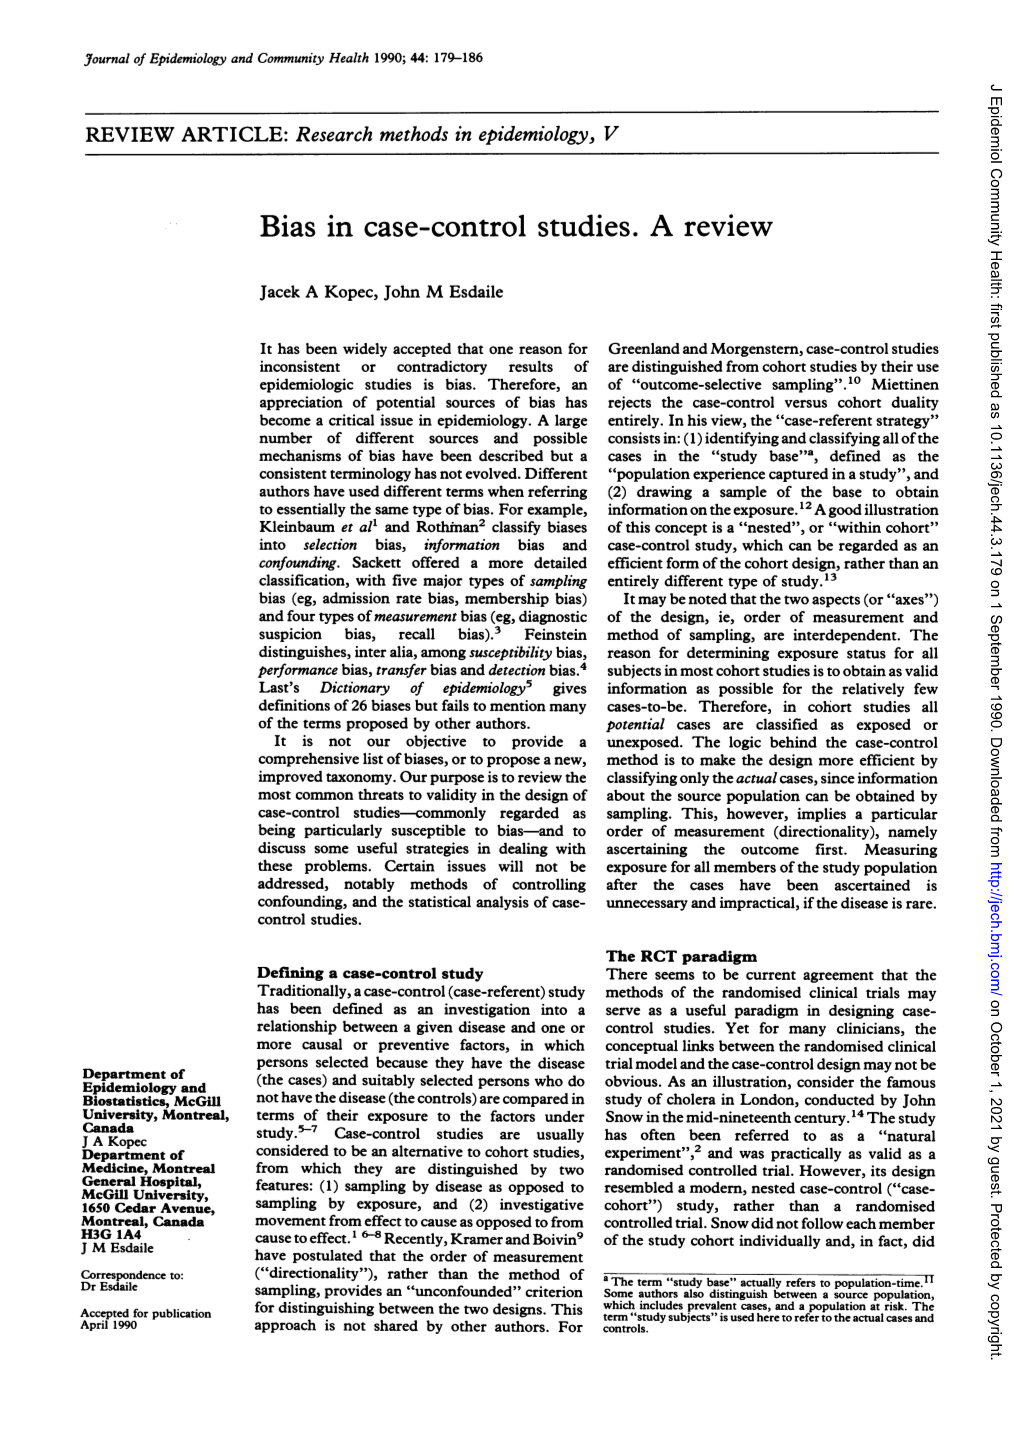 Bias in Case-Control Studies. a Review